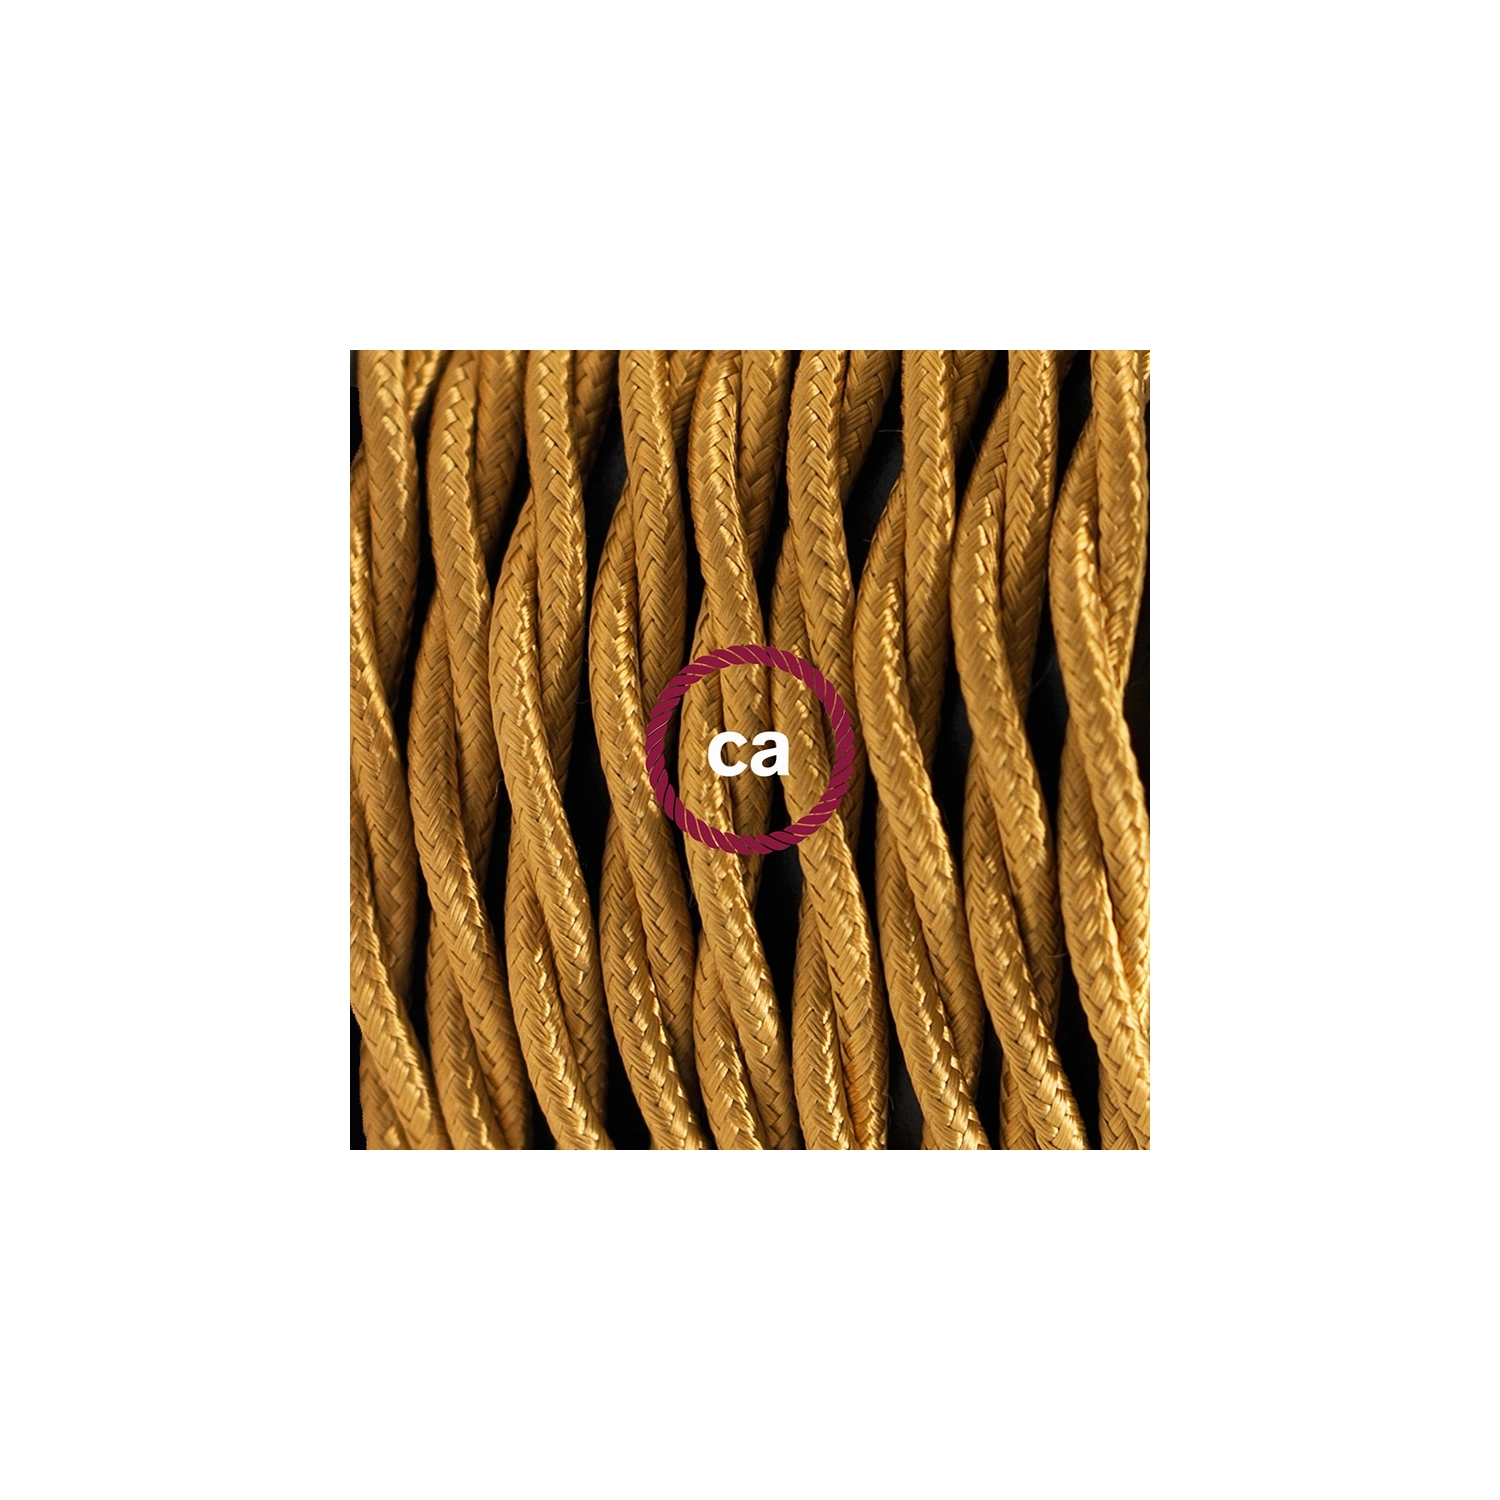 Create your TM05 Gold Rayon Snake and bring the light wherever you want.